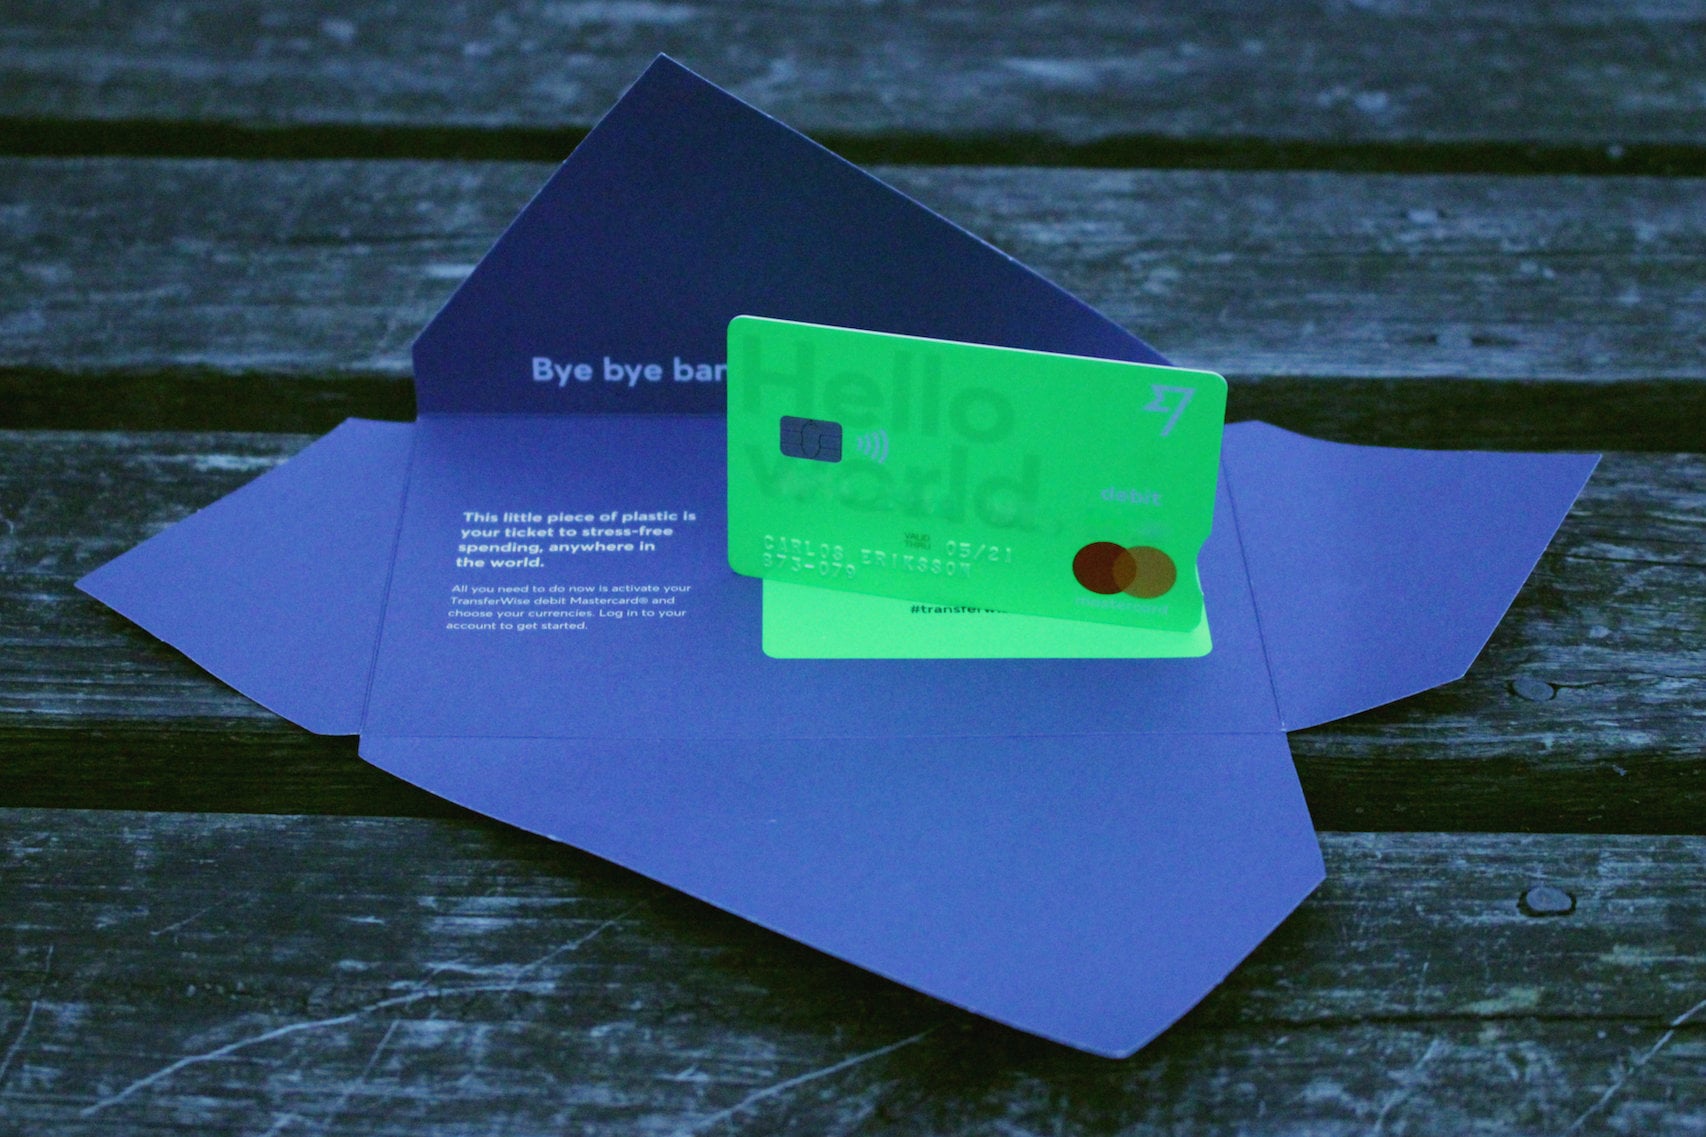 Transferwise and their Borderless Mastercard debit card.